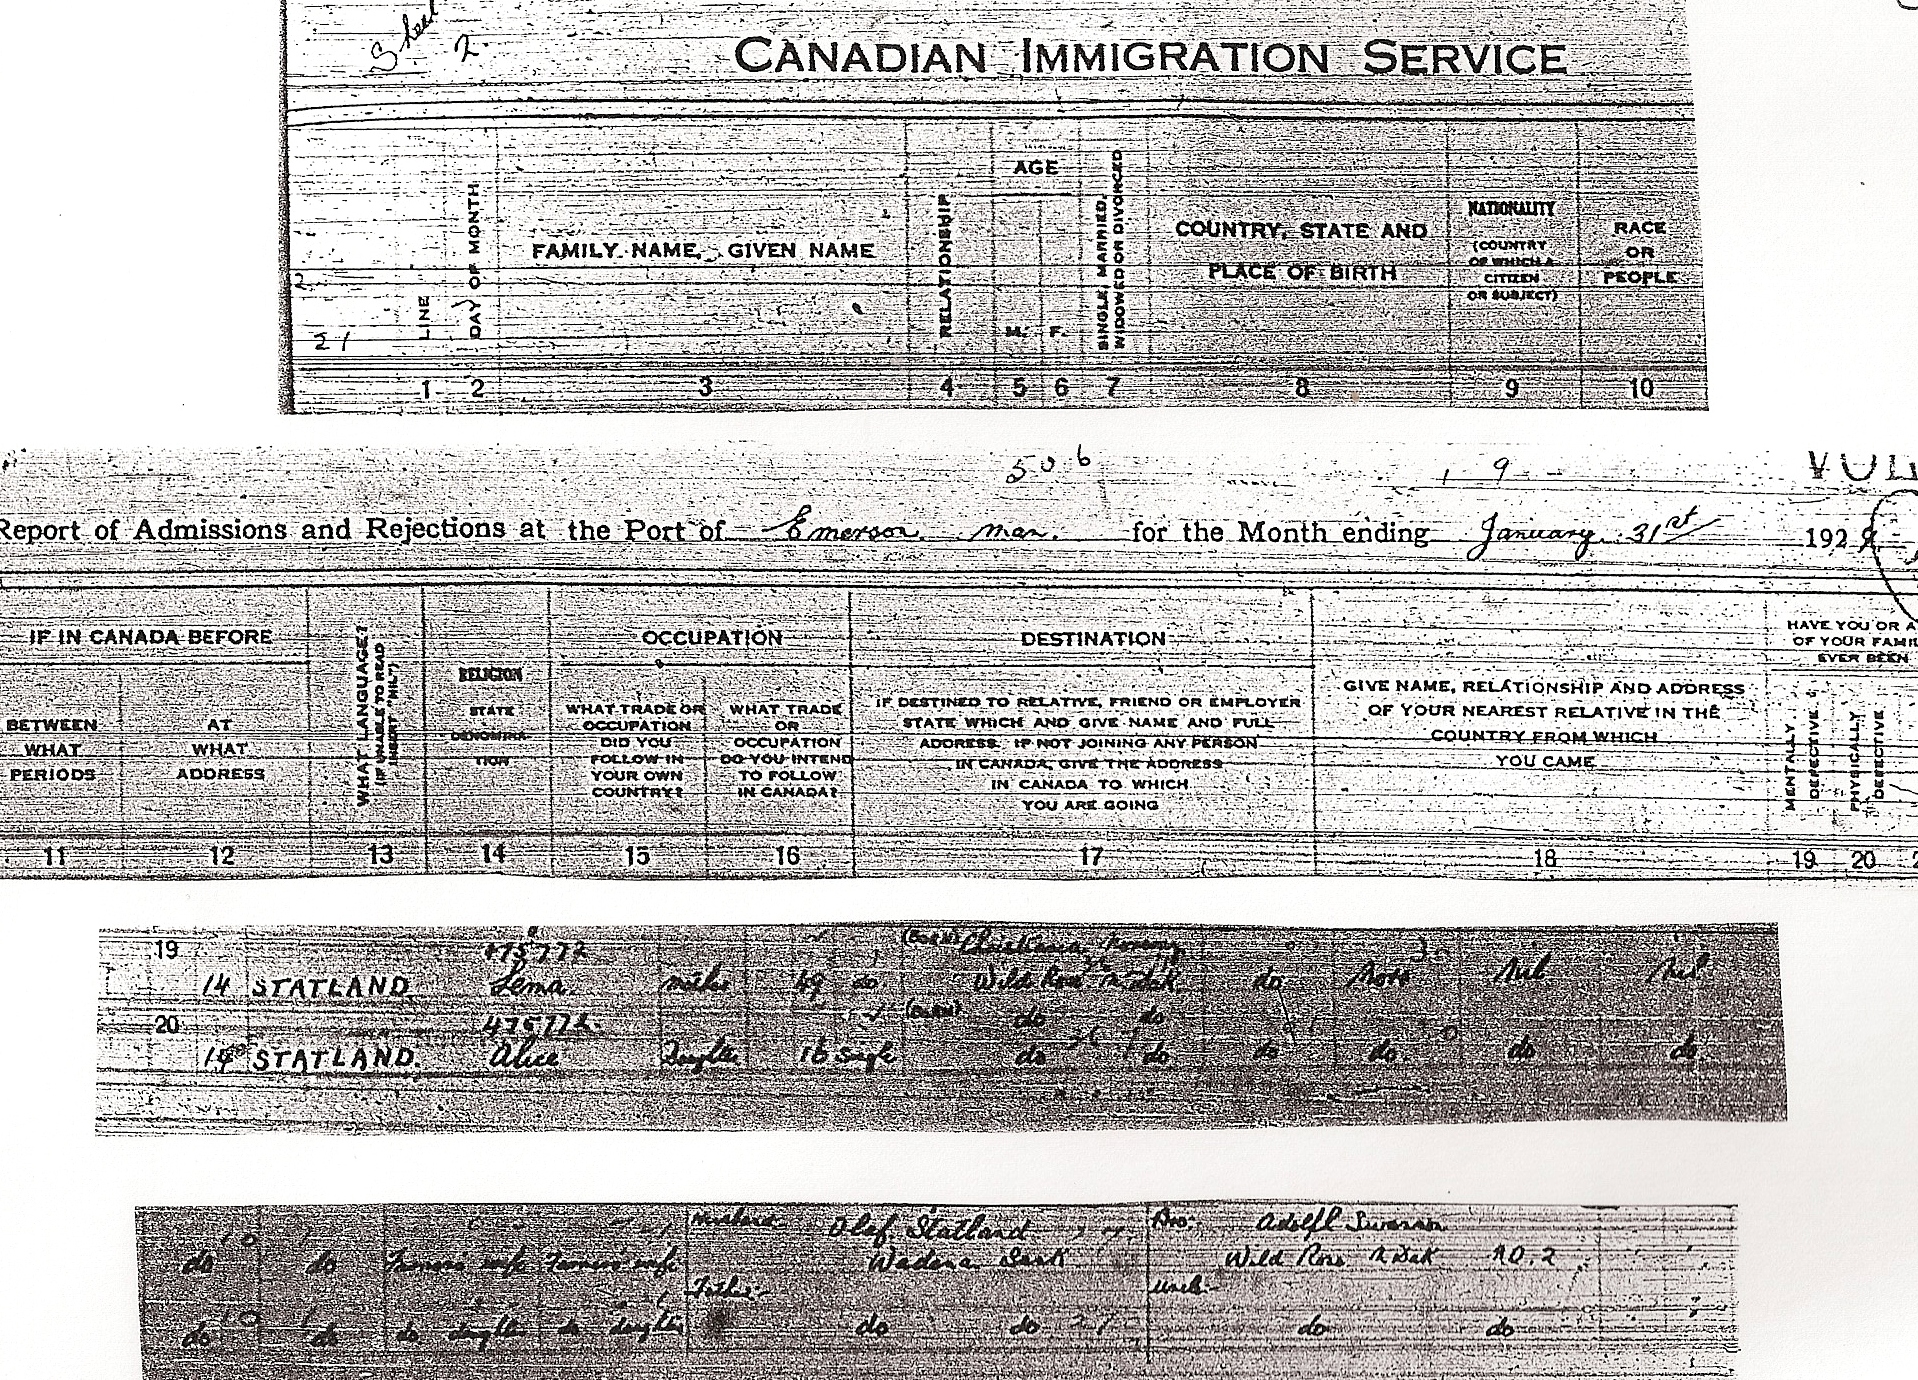 Actual immigration documents-set of 4